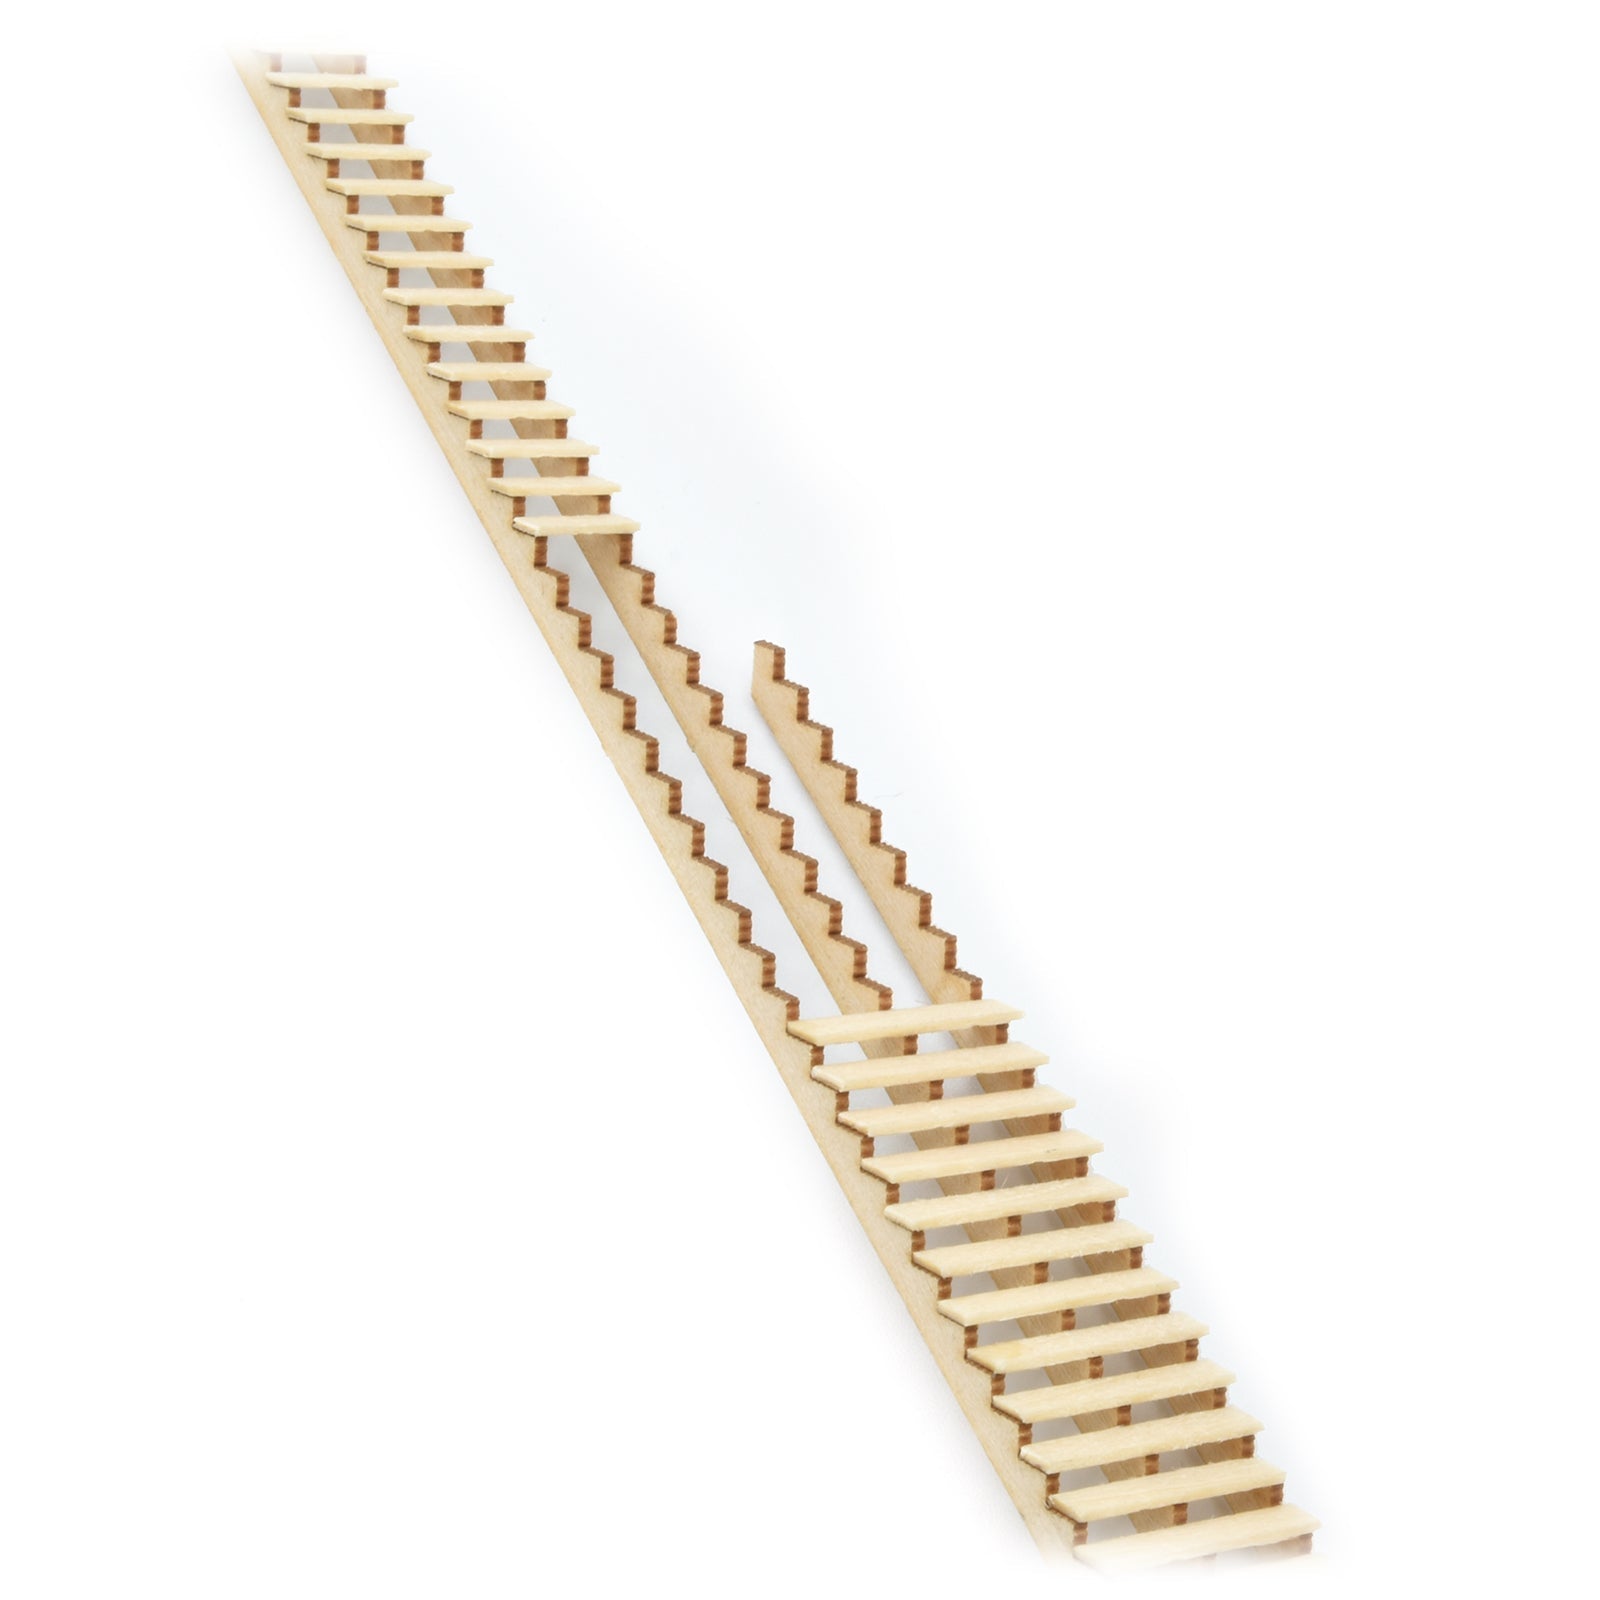 Stair Stringer Kit, HO Scale, By Scientific